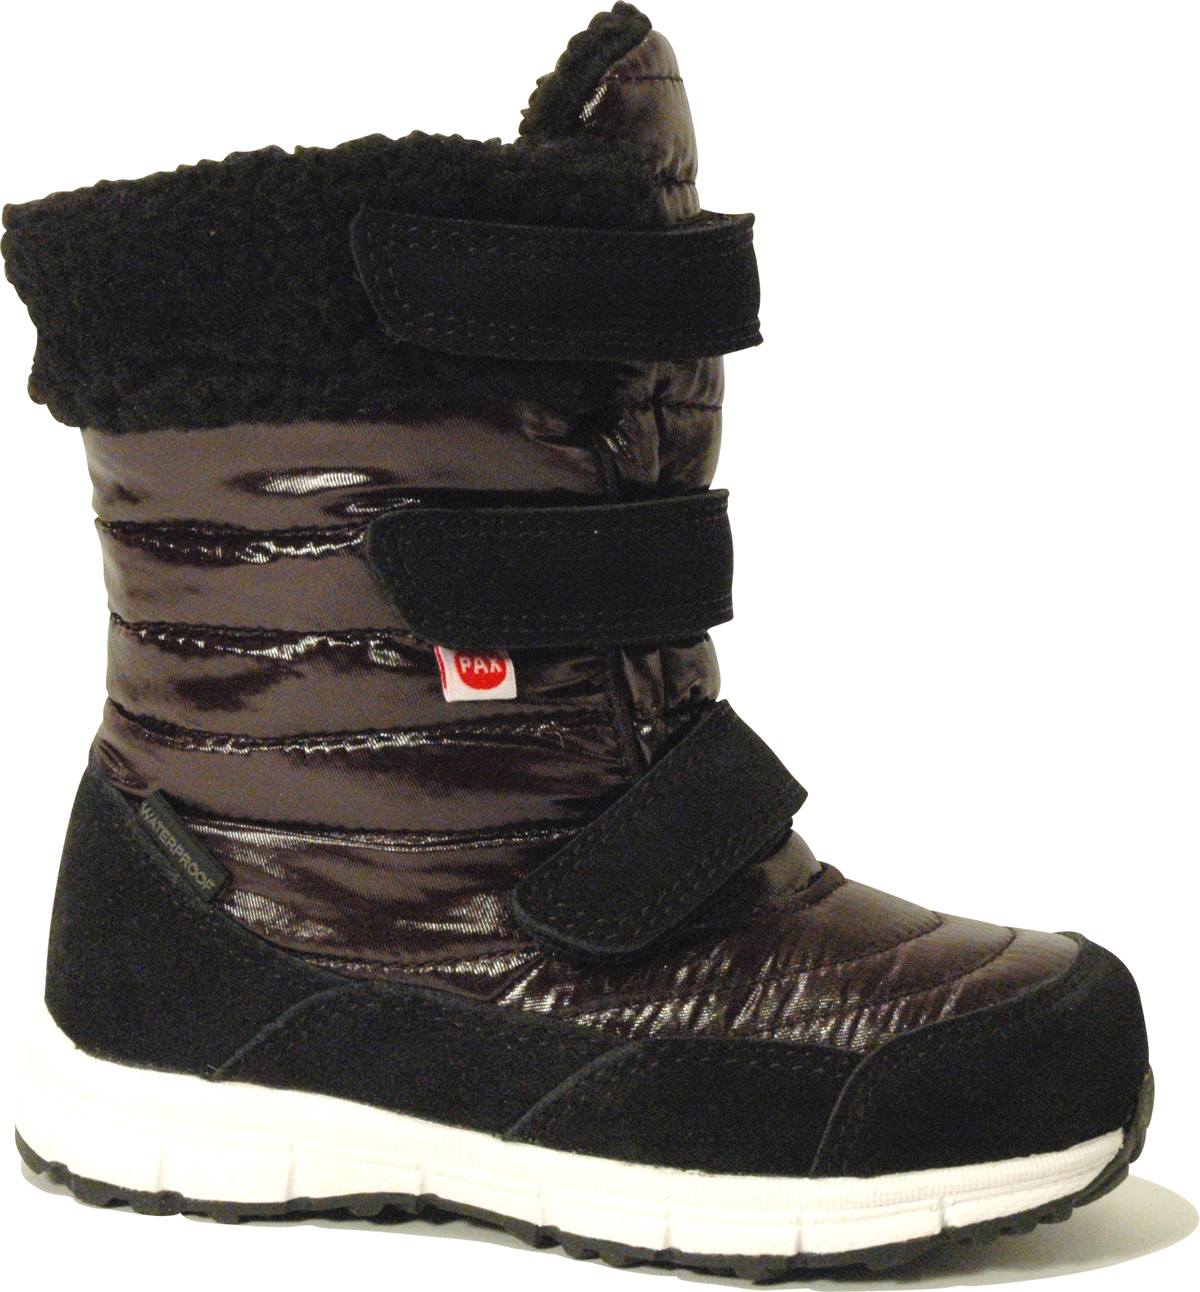 Childrens boots Pax Whitney